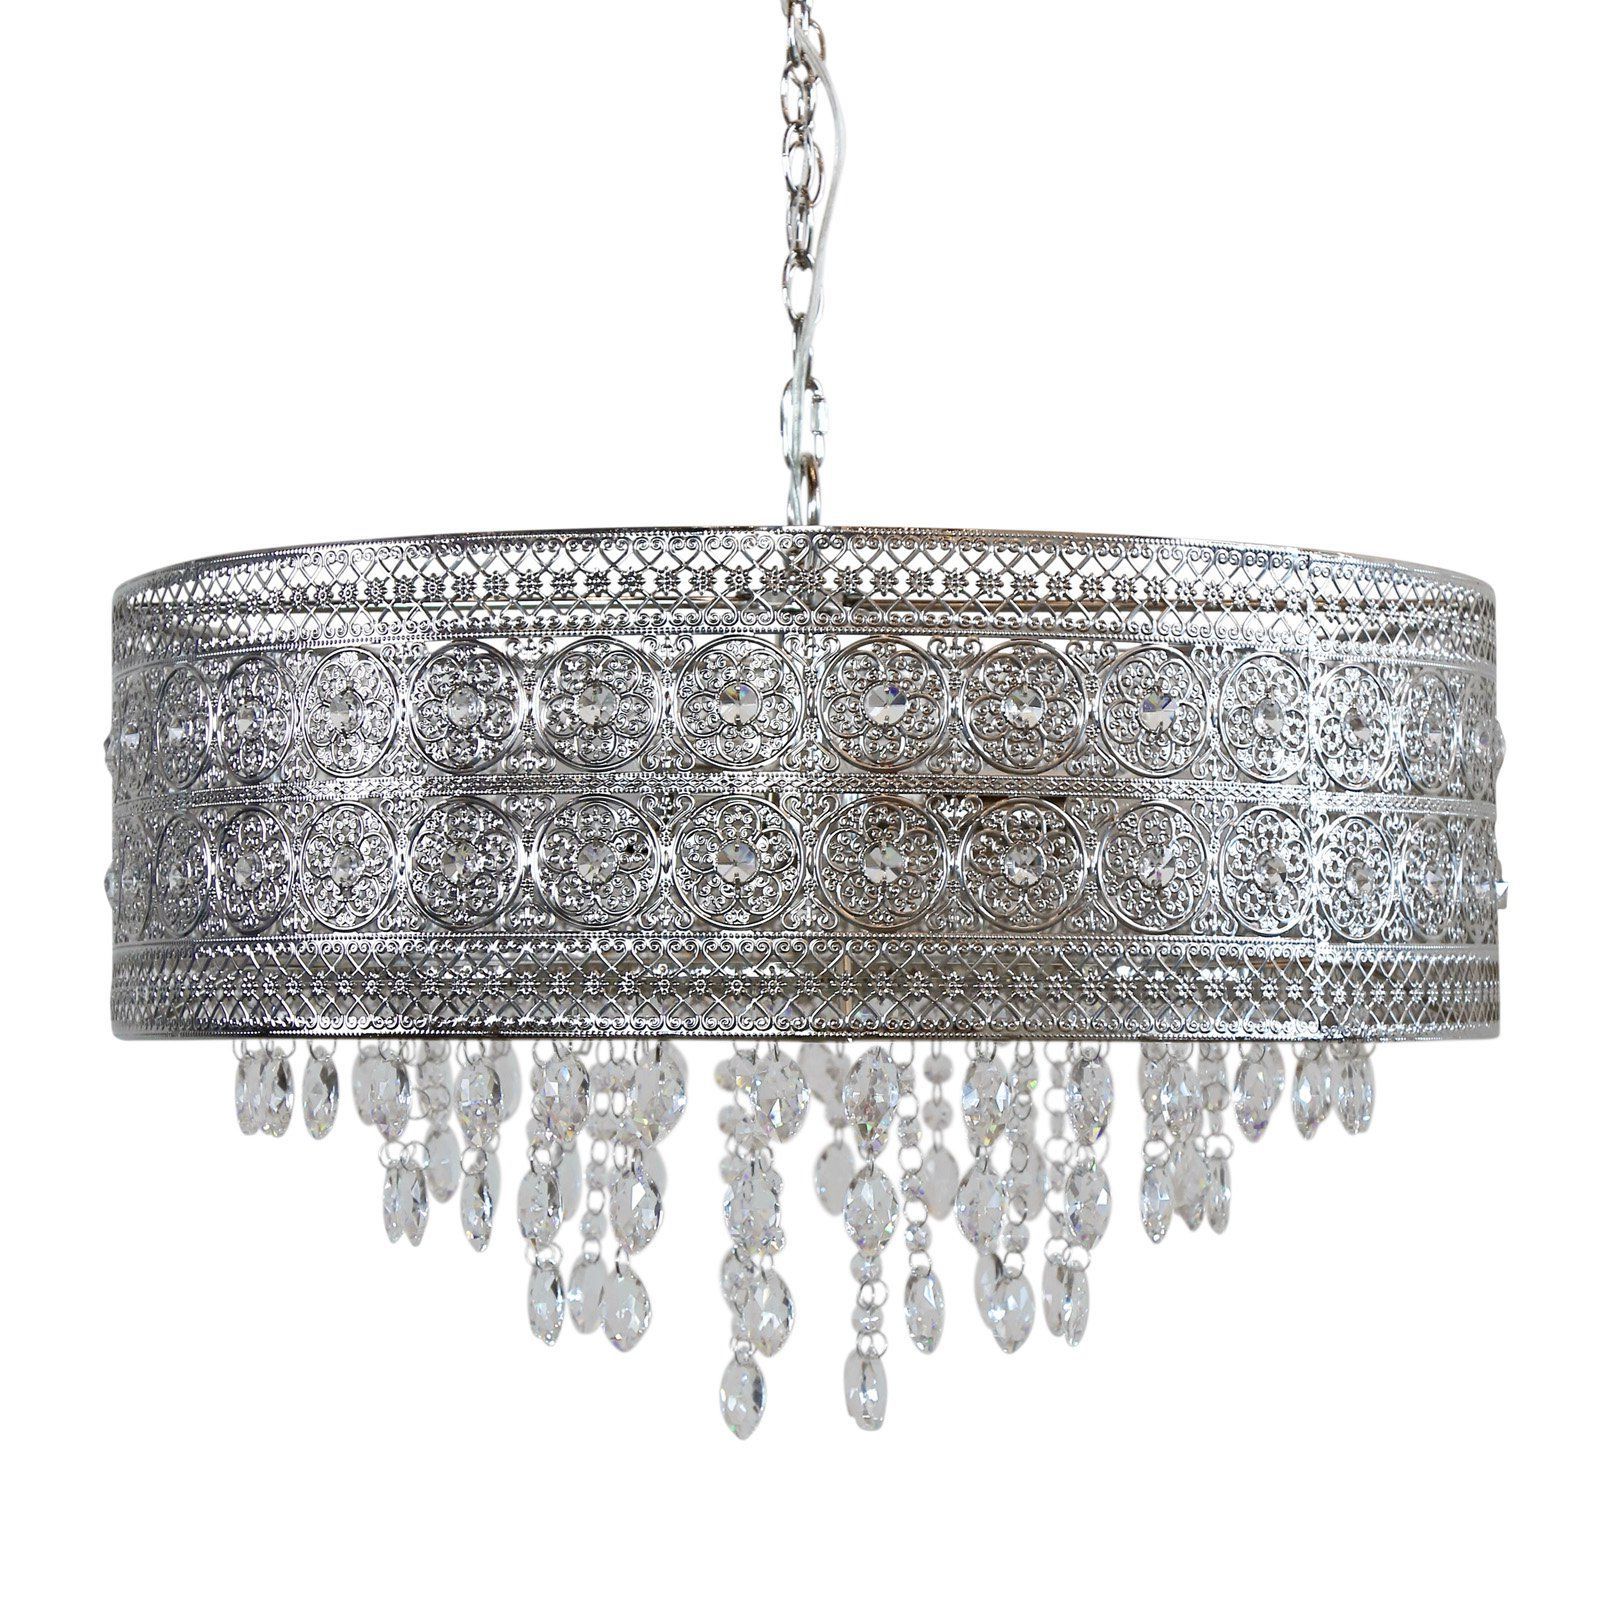 Sinead 4 Light Chandeliers For Preferred River Of Goods Brielle 19374 Crystal Chandelier (View 9 of 25)